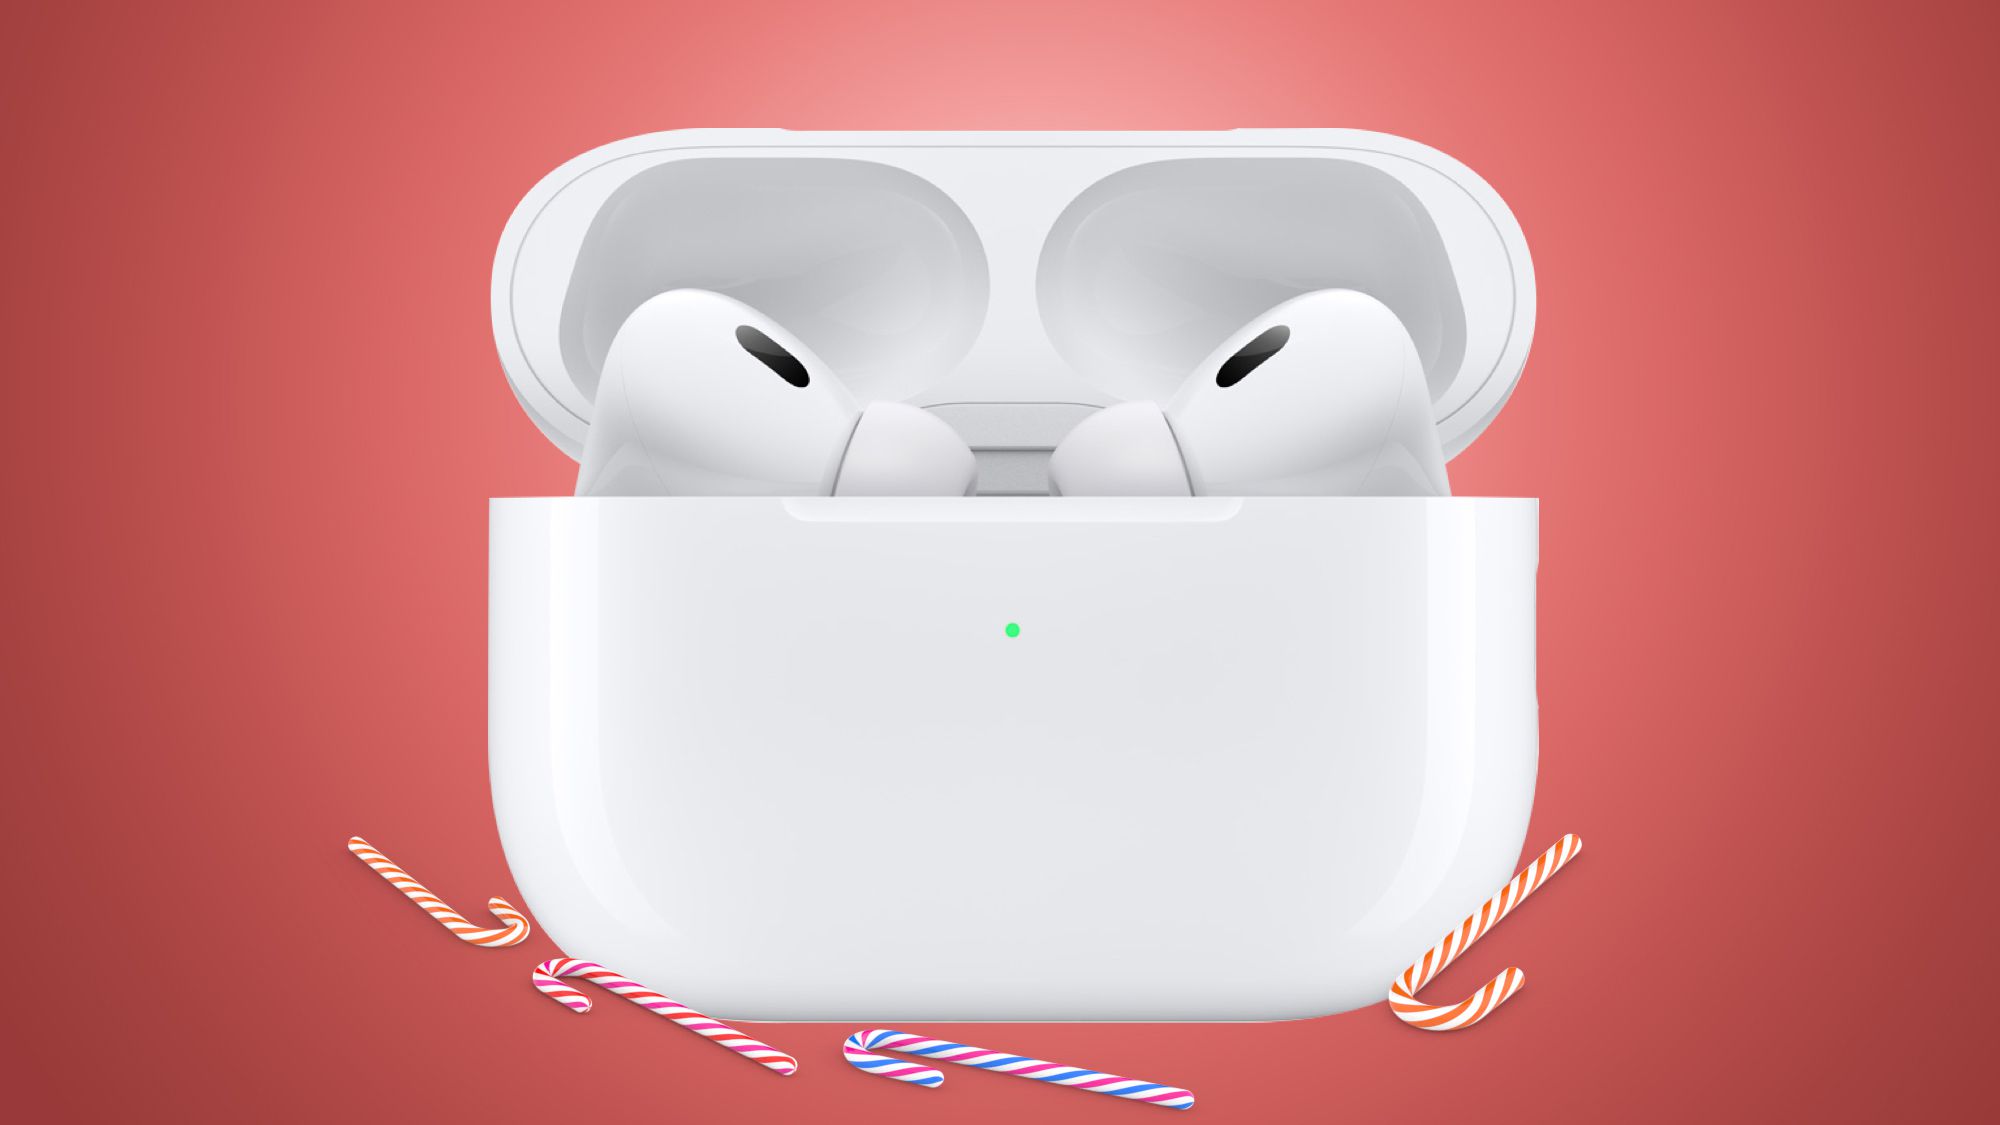 AirPods Pro 2 Available for All-Time Low Price of $197.99 Ahead of Black Friday [Update: Sold Out]